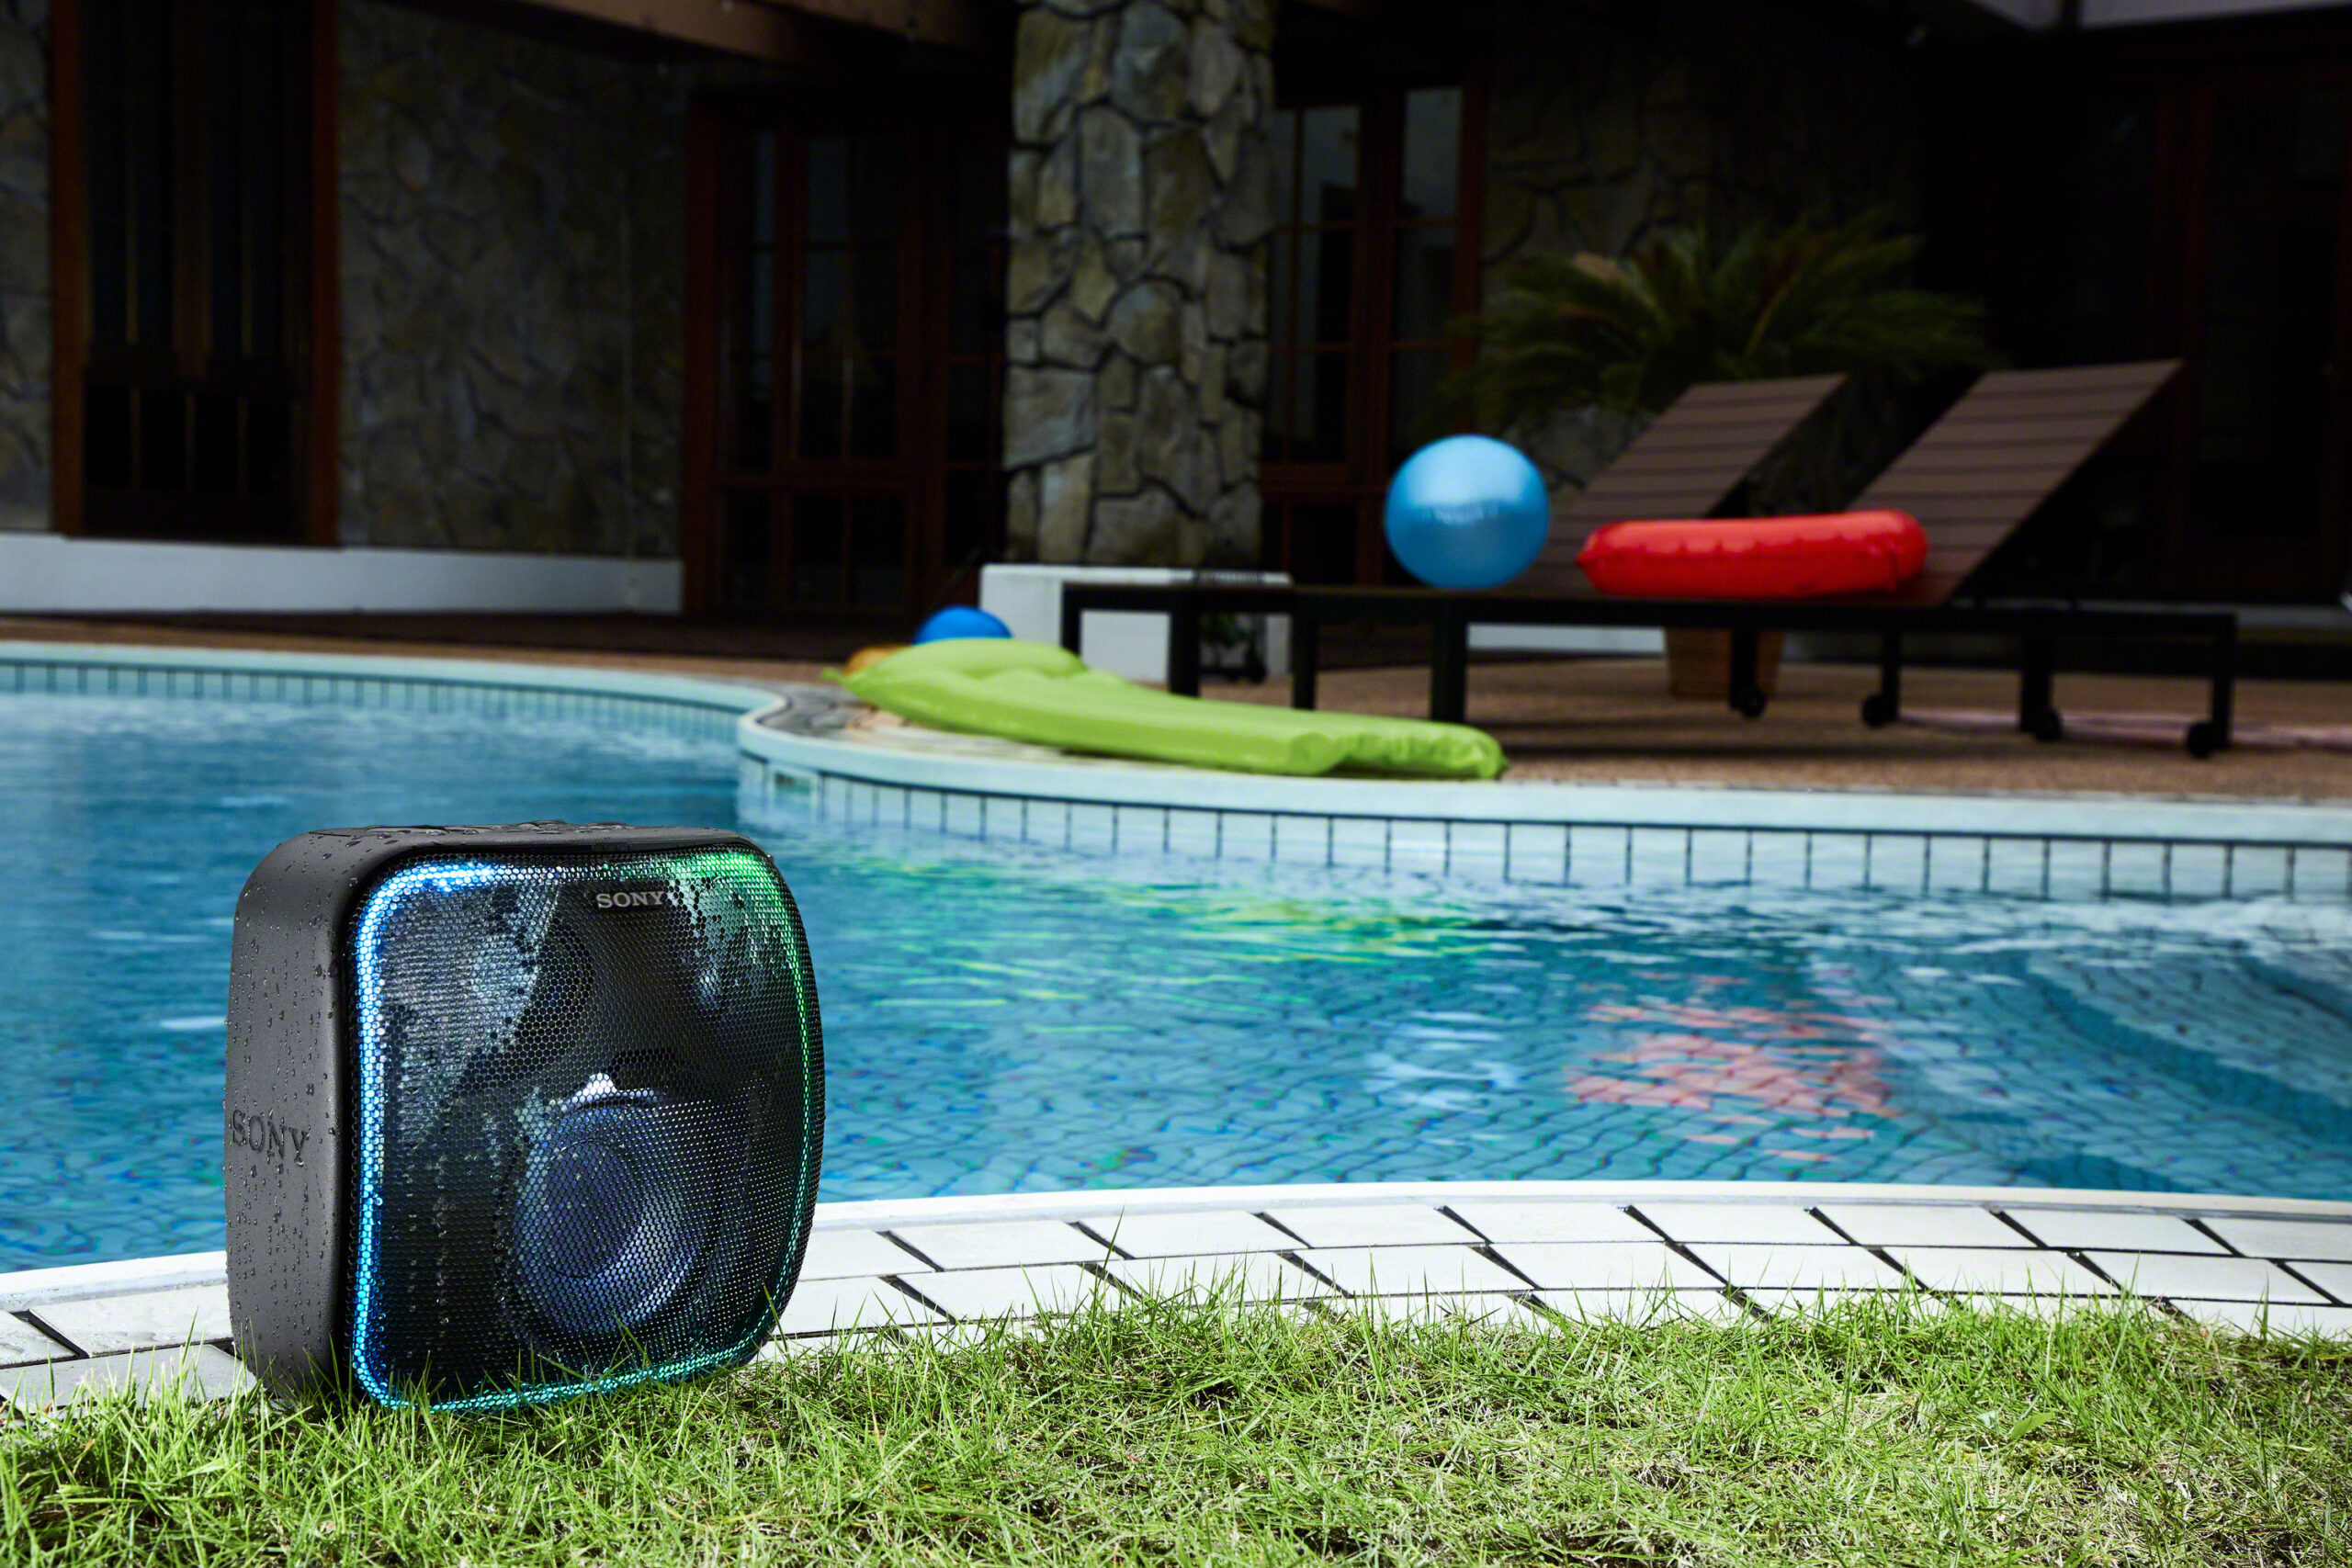 Sony SRS-XB501G press release image of the speaker on the grass by a pool.